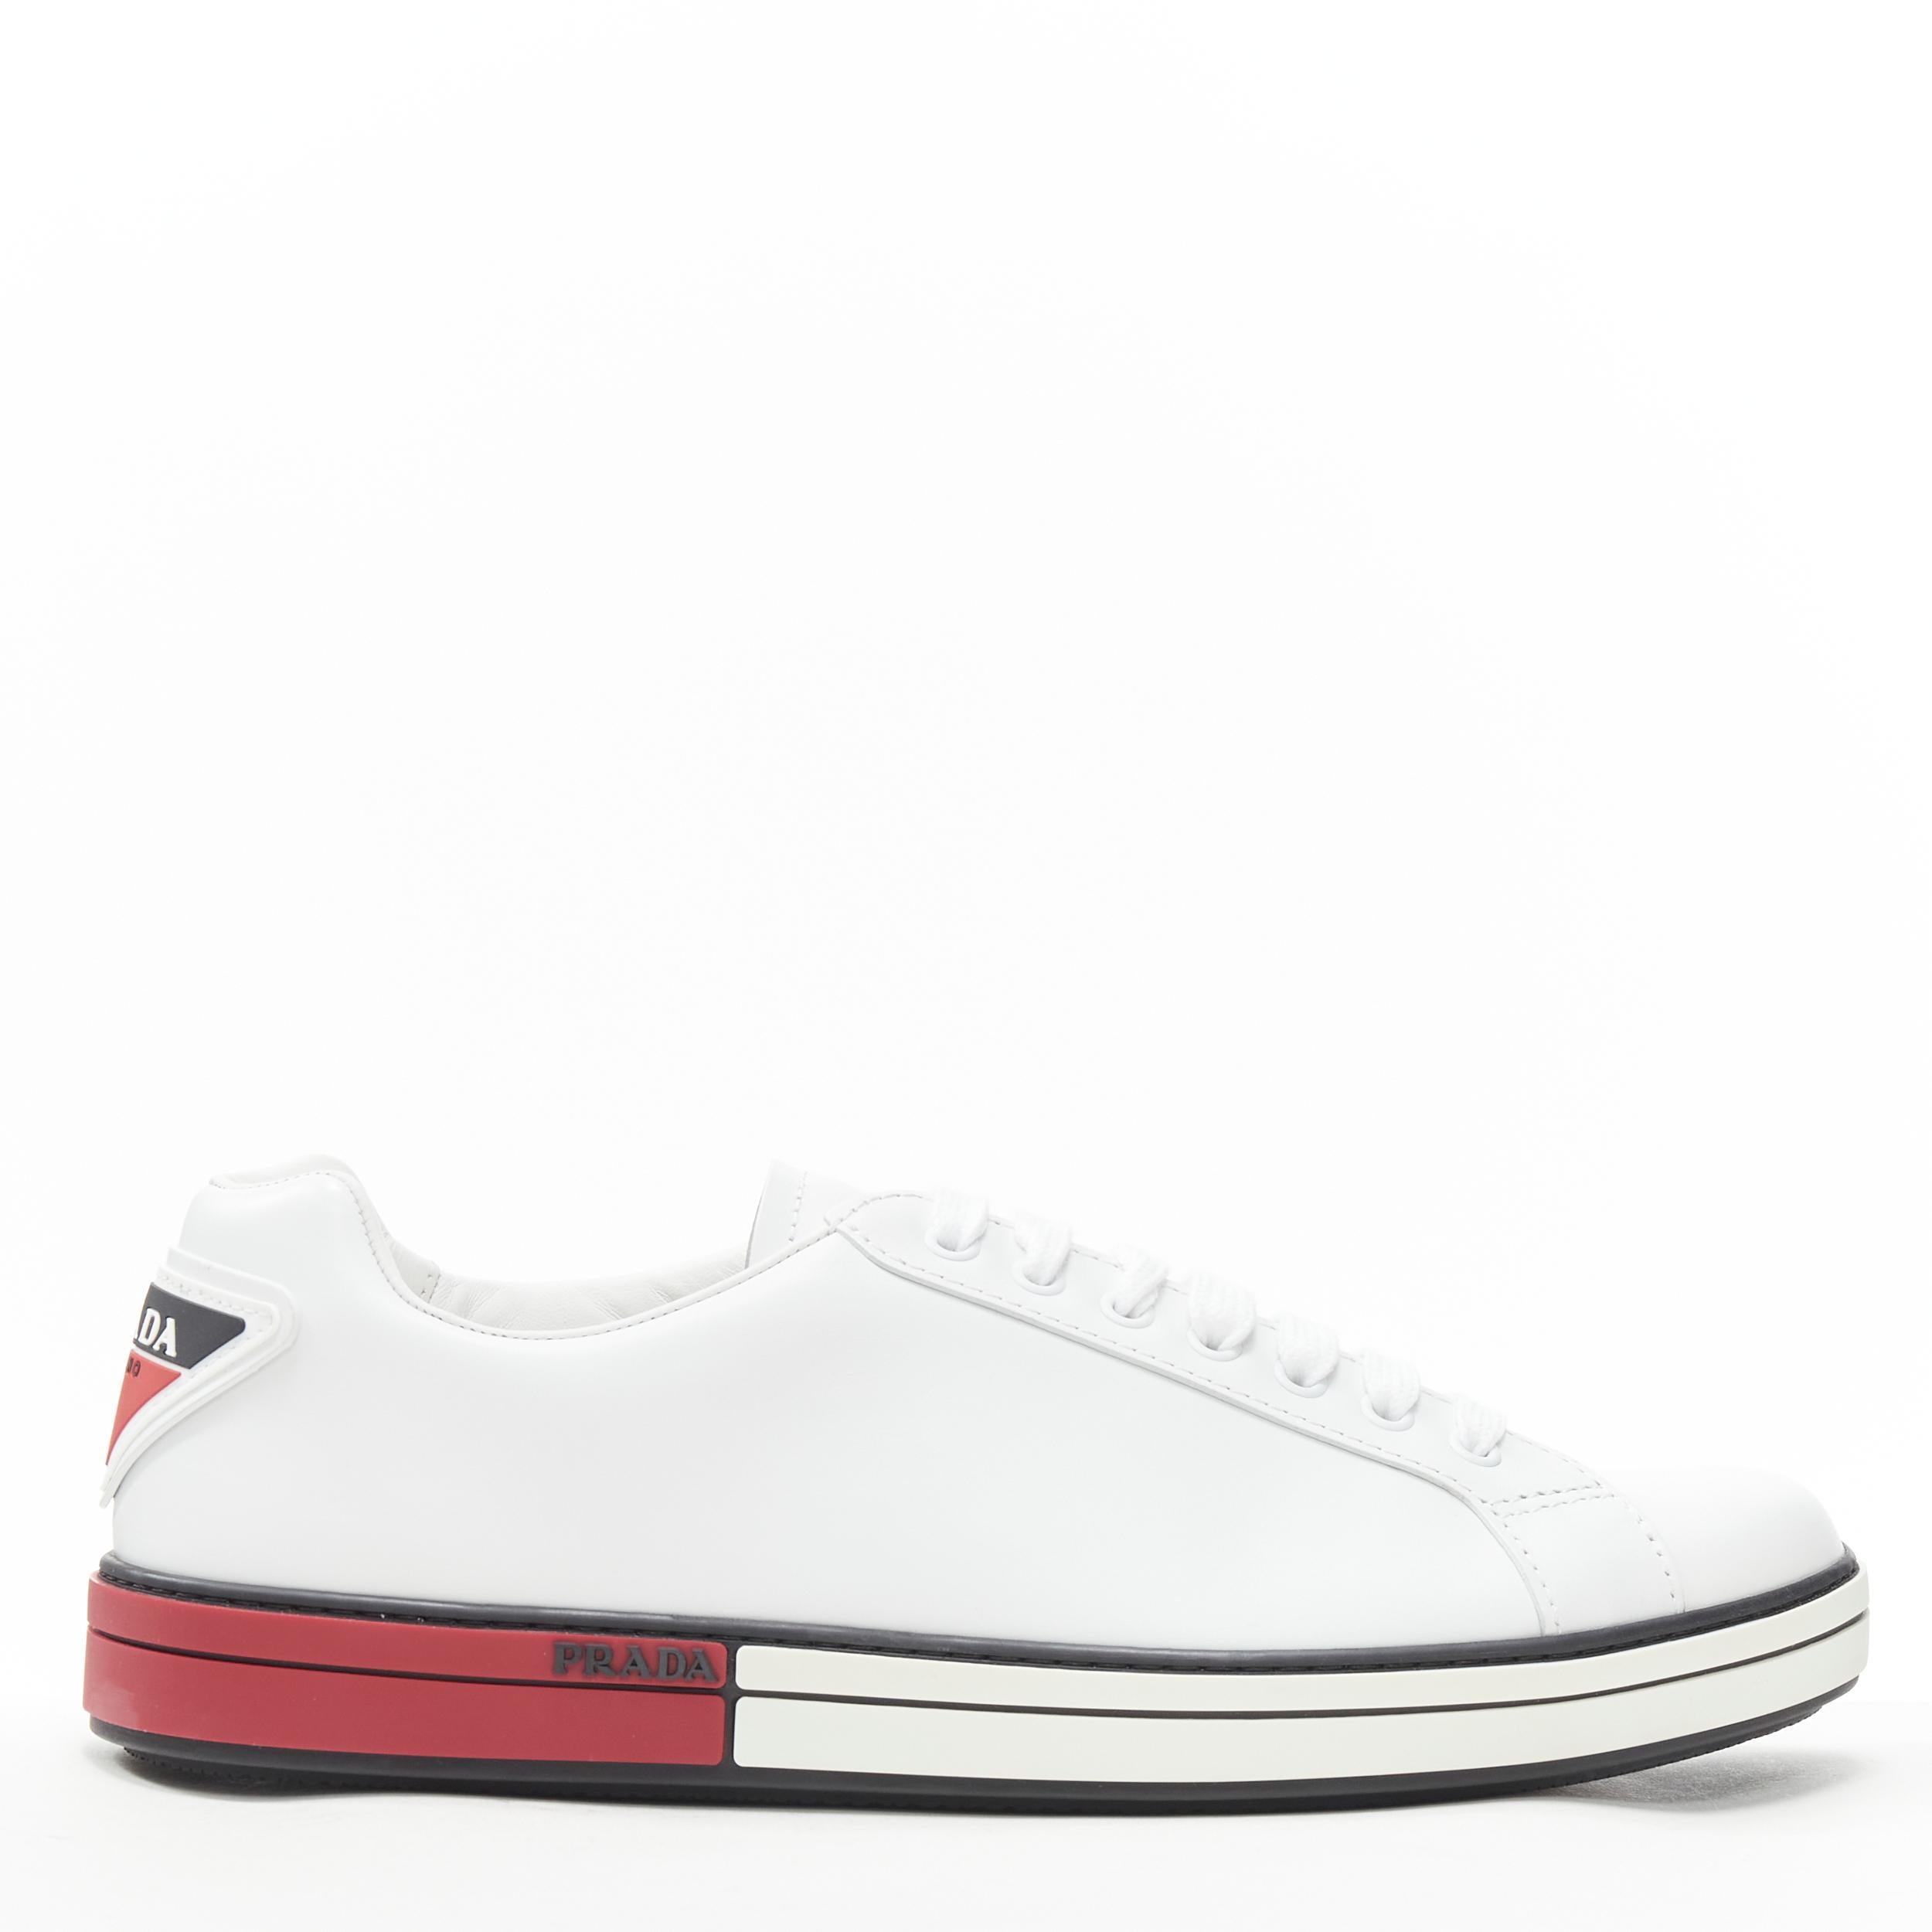 new PRADA white leather triangle logo red white midsole low sneaker UK11 Reference: TGAS/B00914 
Brand: Prada 
Designer: Miuccia Prada 
Model: White sneaker 
Collection: 2018 
Material: Leather 
Color: White 
Pattern: Solid 
Closure: Strap 
Extra